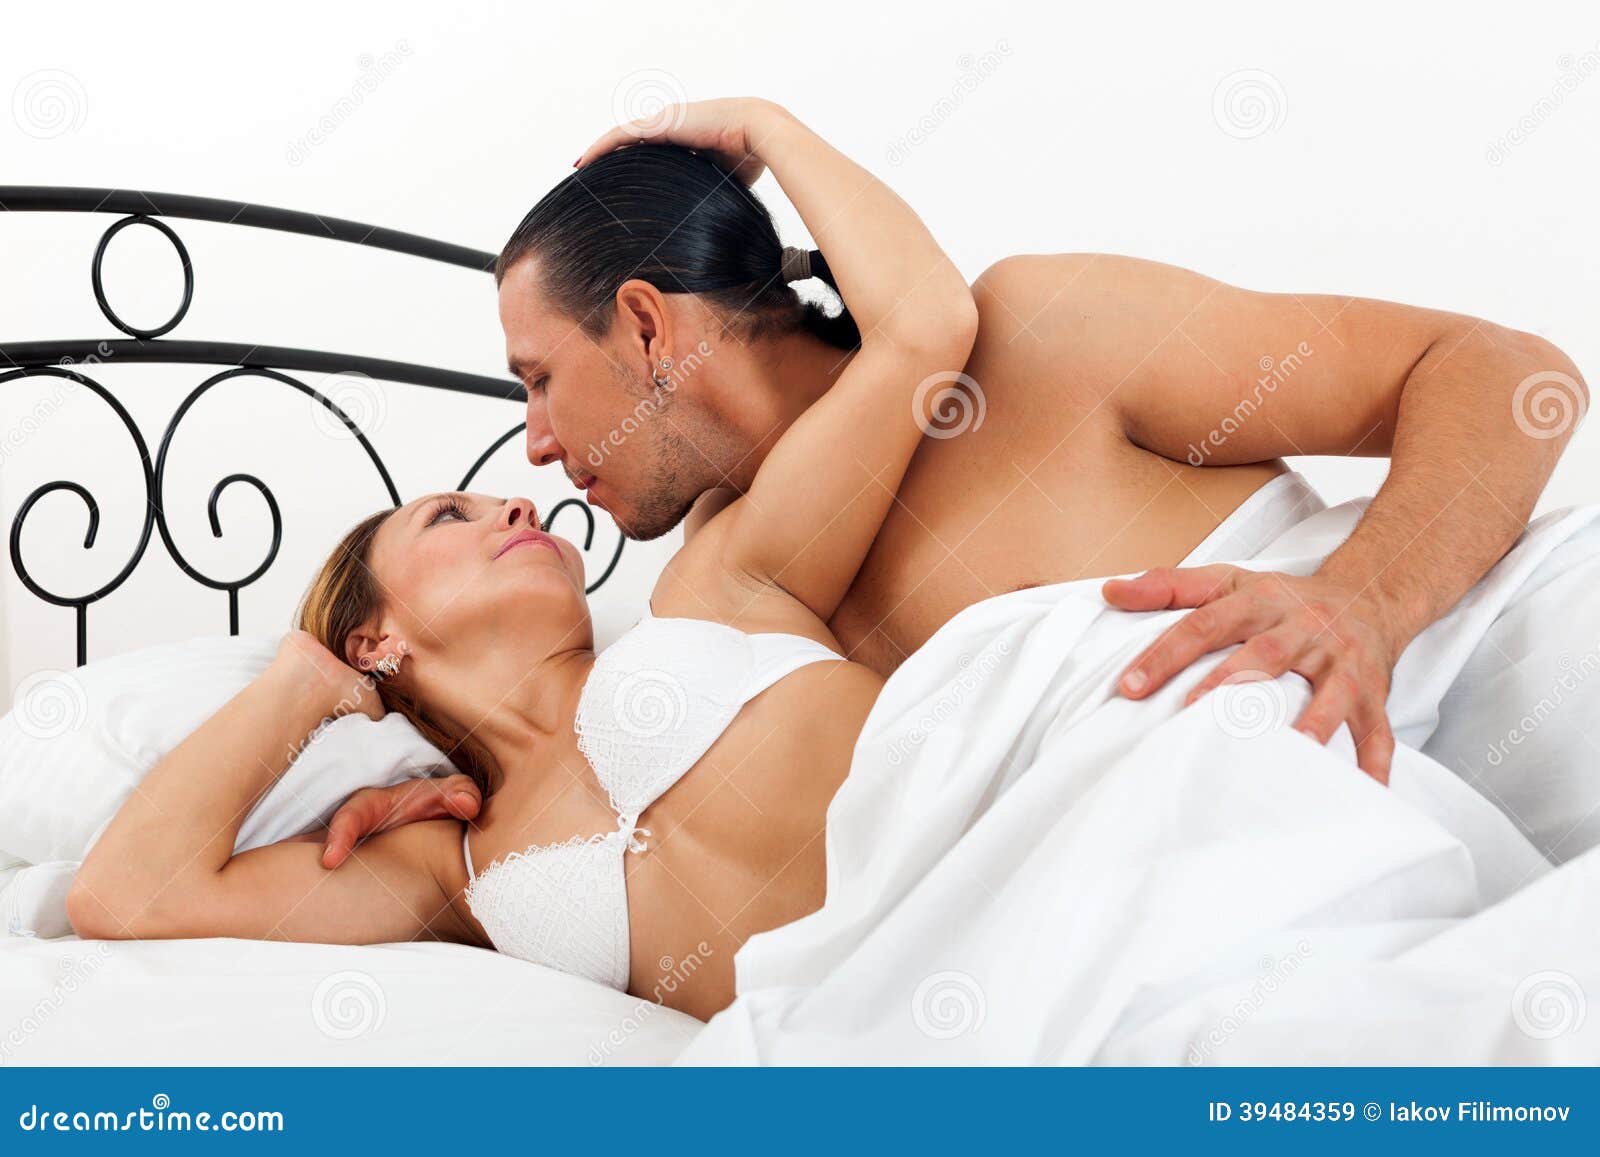 Adult Couple Having Sex on Bed Stock Image Porn Photo Hd